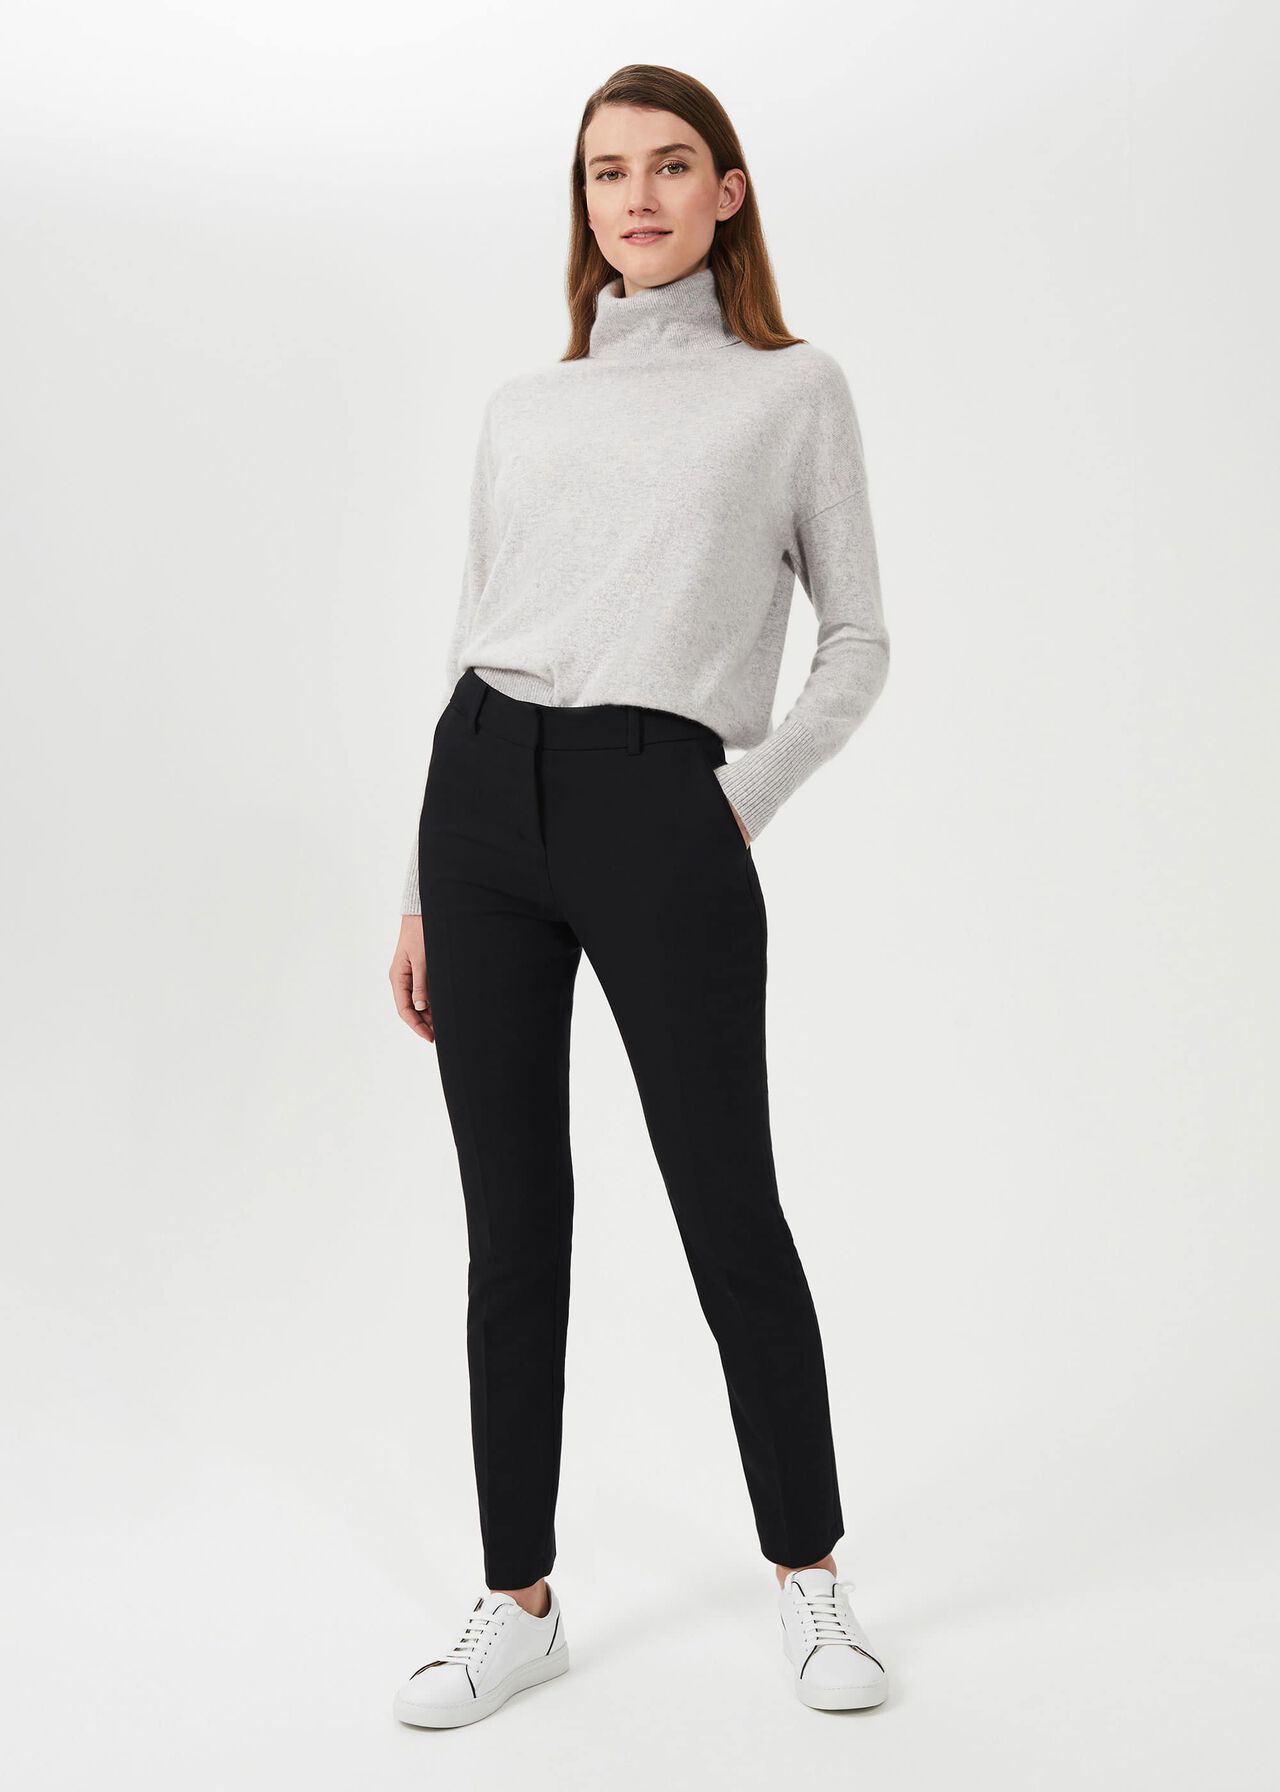 Trousers Uterque Black size 8 UK in Cotton - 35895052